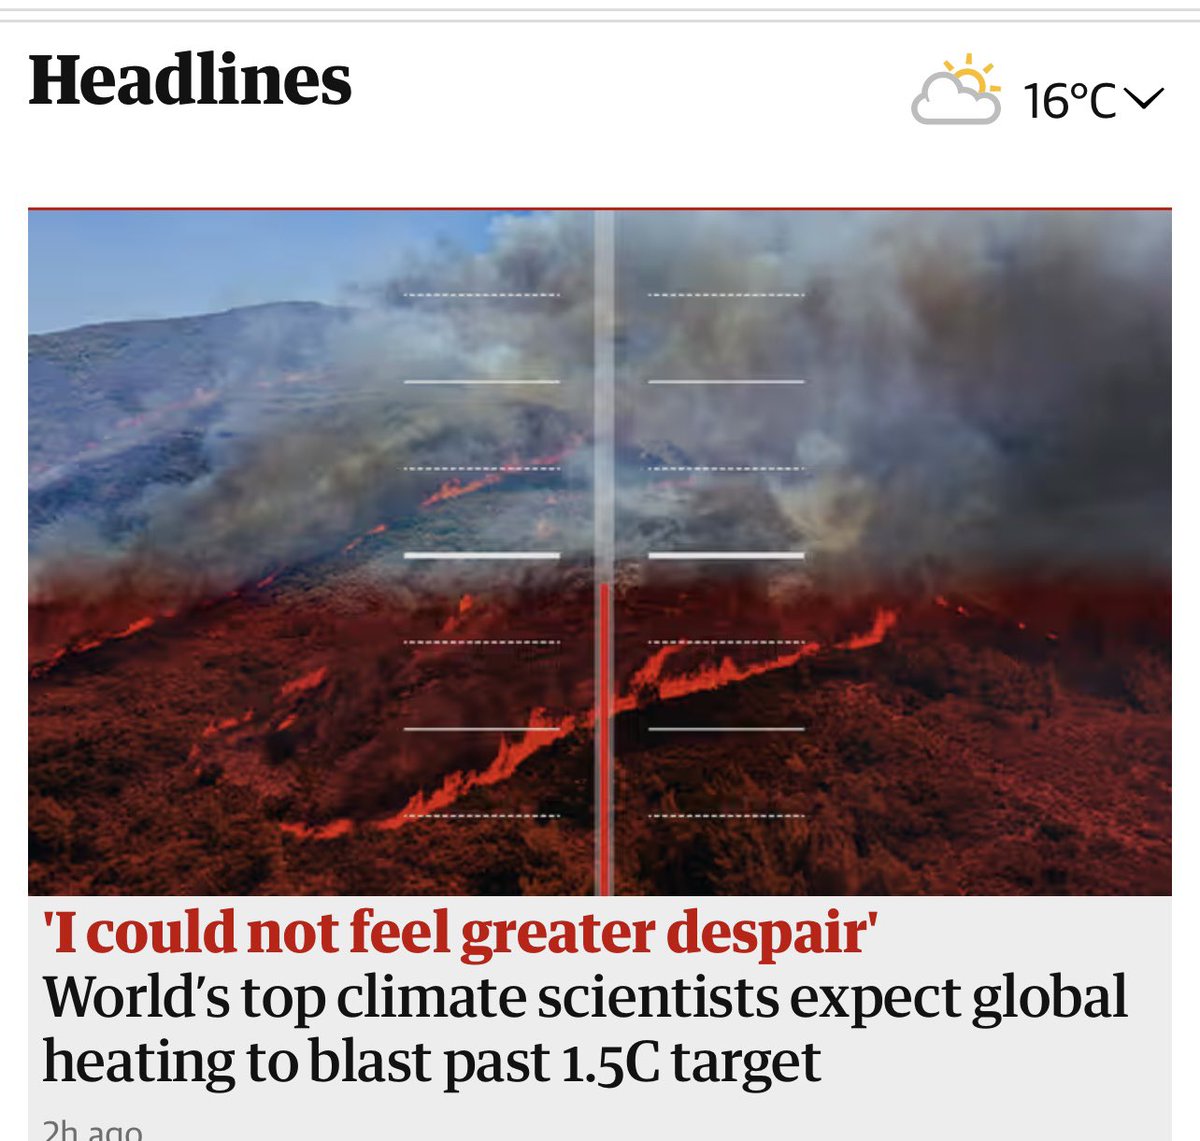 'WE ARE HEADED FOR MAJOR SOCIETAL DISRUPTION WITHIN THE NEXT FIVE YEARS'. Wow. Lead story in The Guardian. A dose of reality. SCIENTIST: 'WHAT THE FUCK DO WE HAVE TO DO TO MAKE YOU REALISE HOW SERIOUS THIS IS?'theguardian.com/environment/ar…